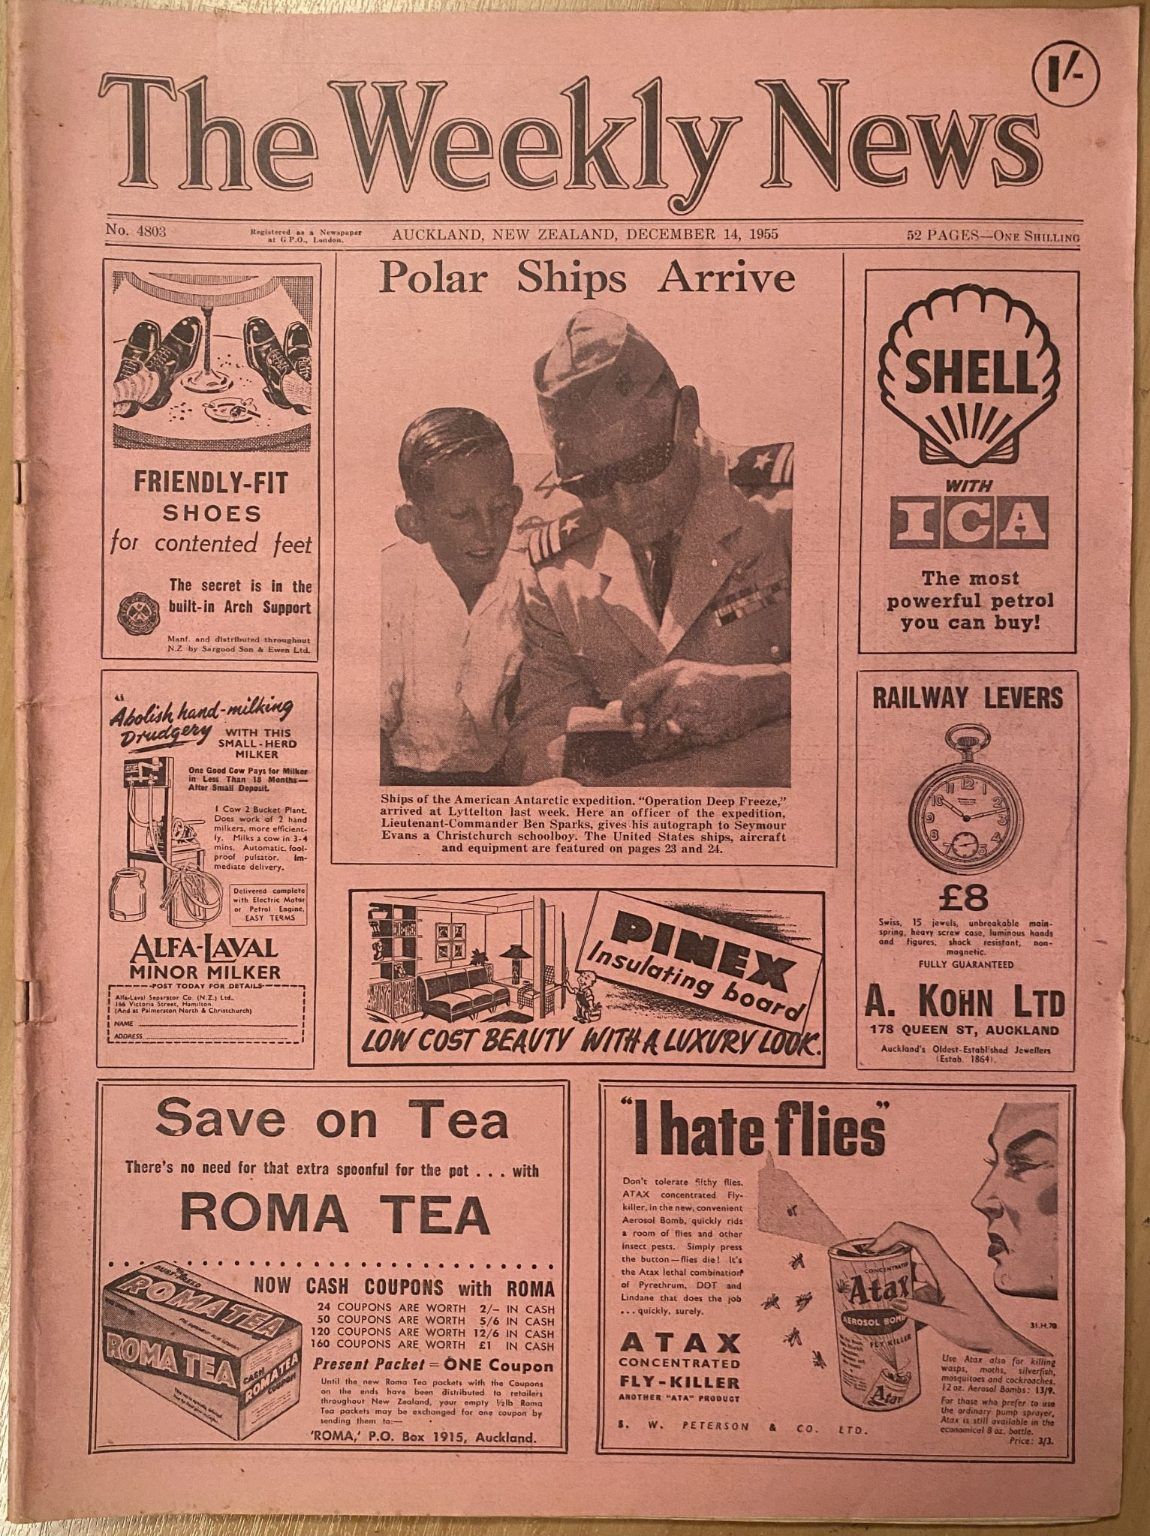 OLD NEWSPAPER: The Weekly News - No. 4803, 14 December 1955